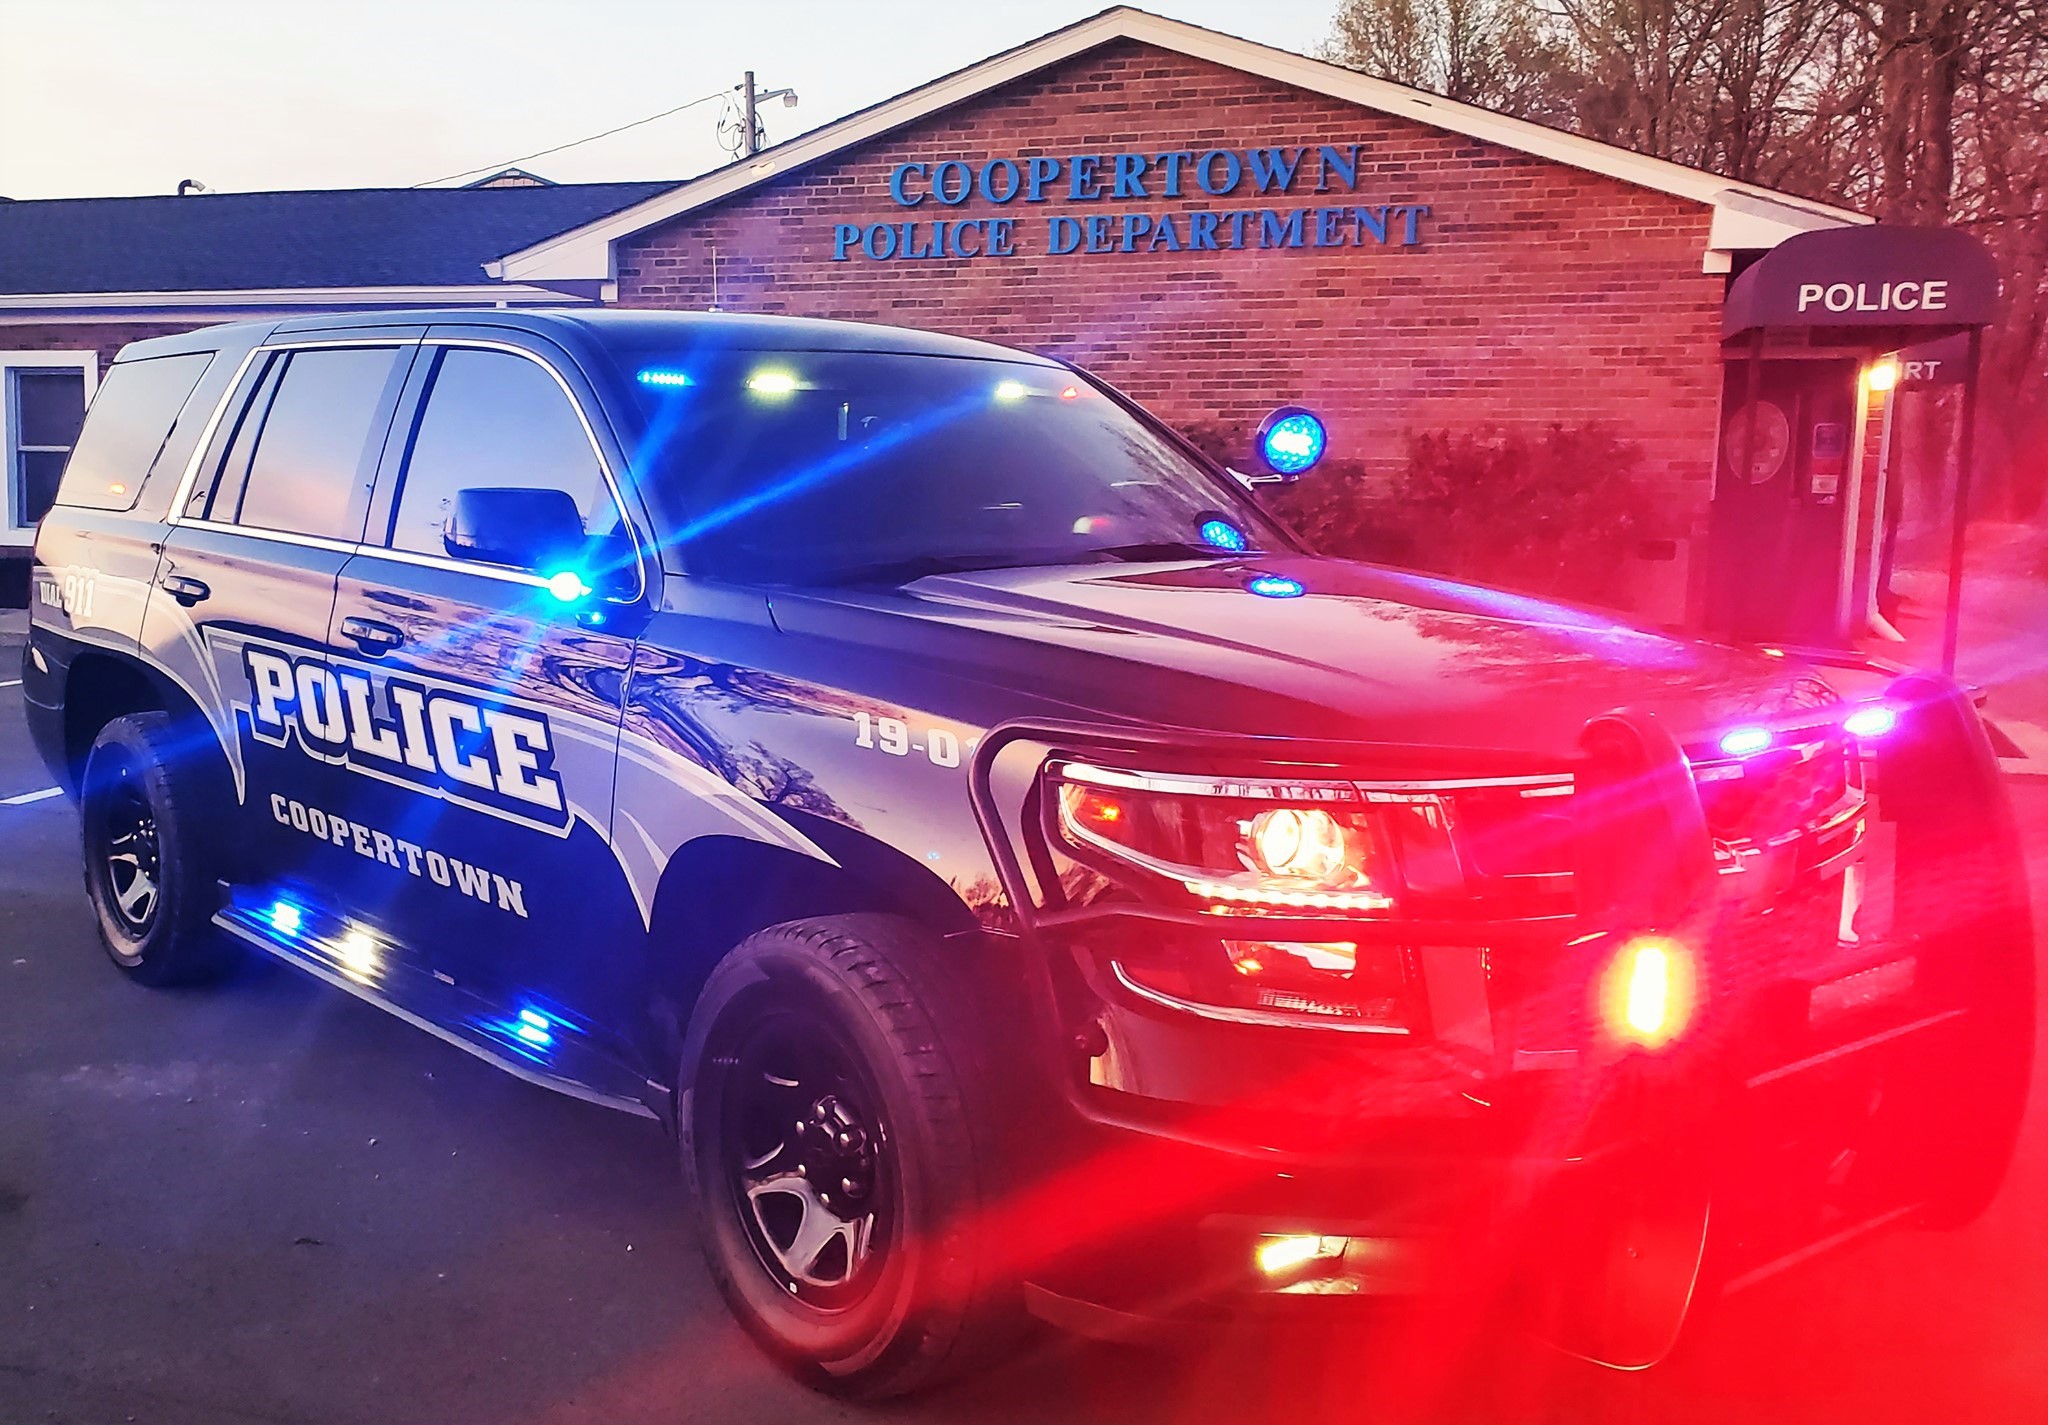 Coopertown Police accepting applications for Patrol Officer